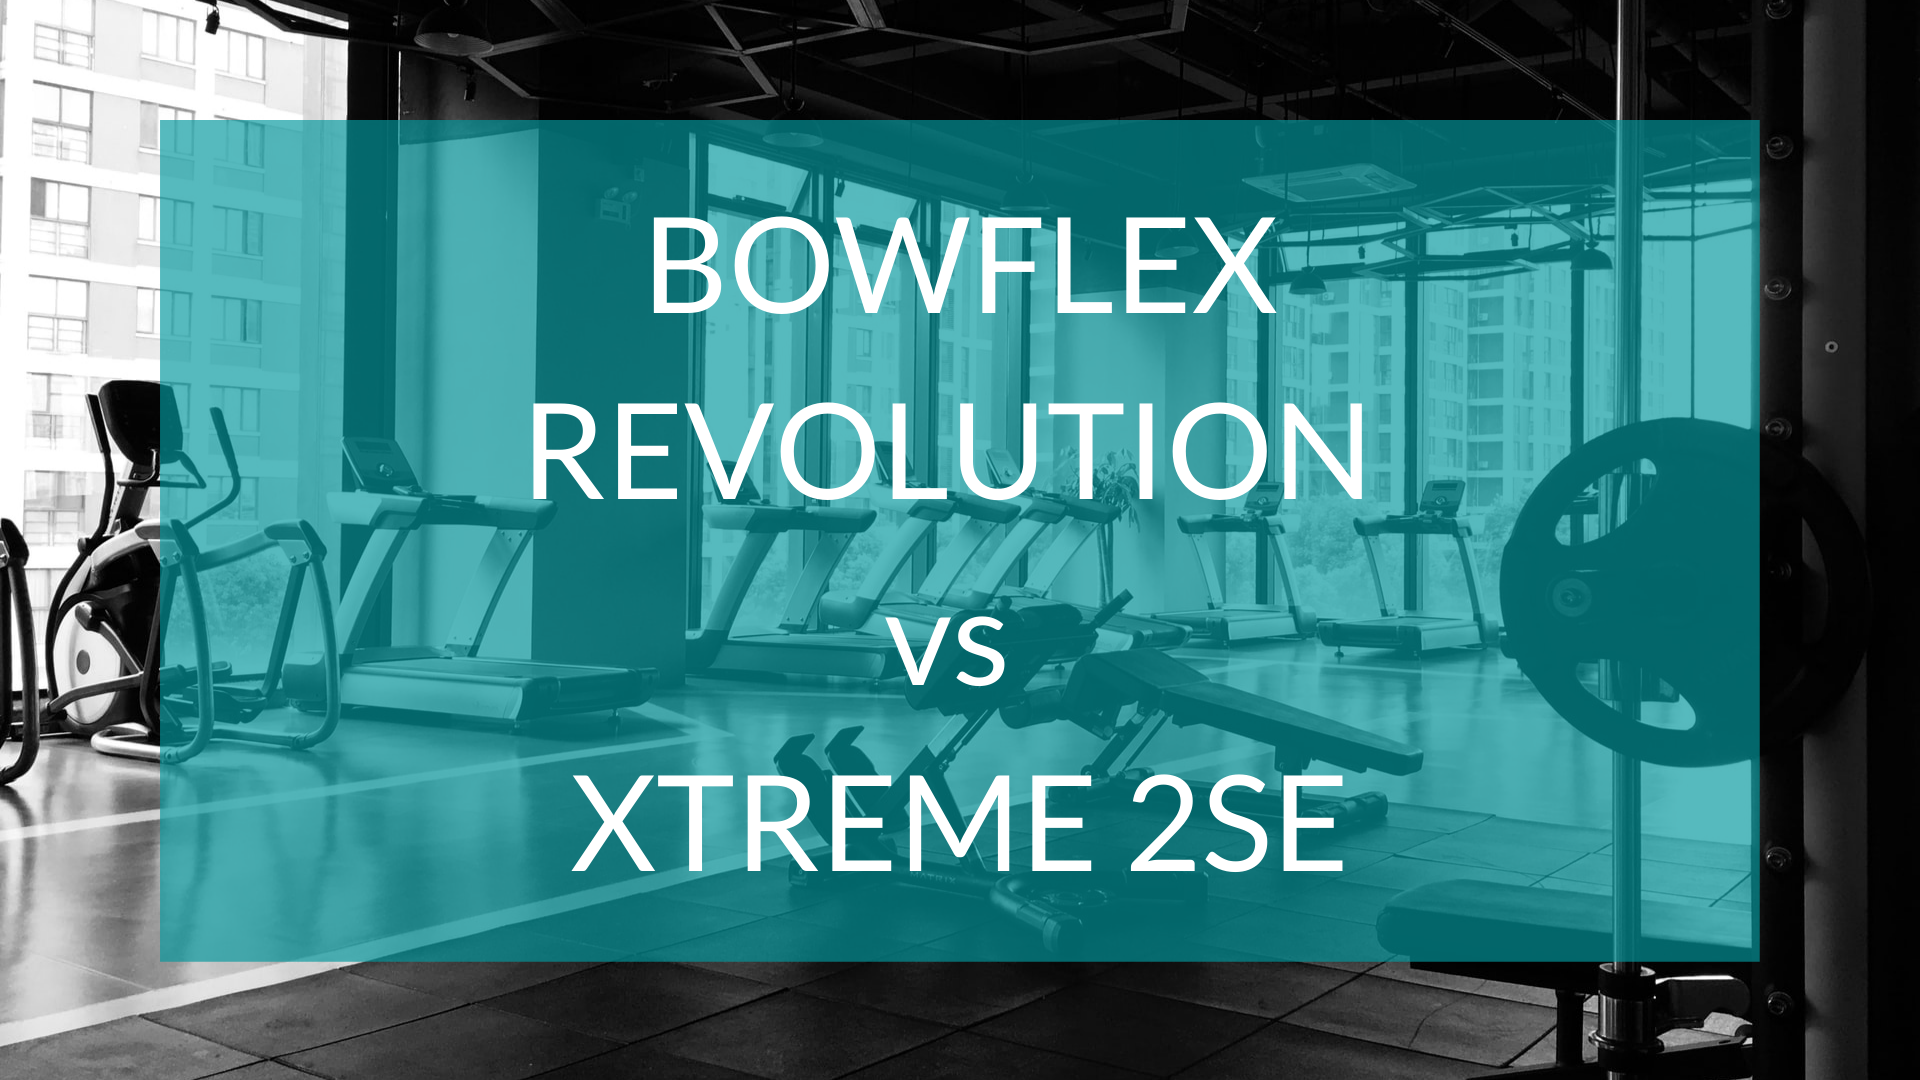 Bowflex Revolution vs Xtreme 2 SE text in front of gym background